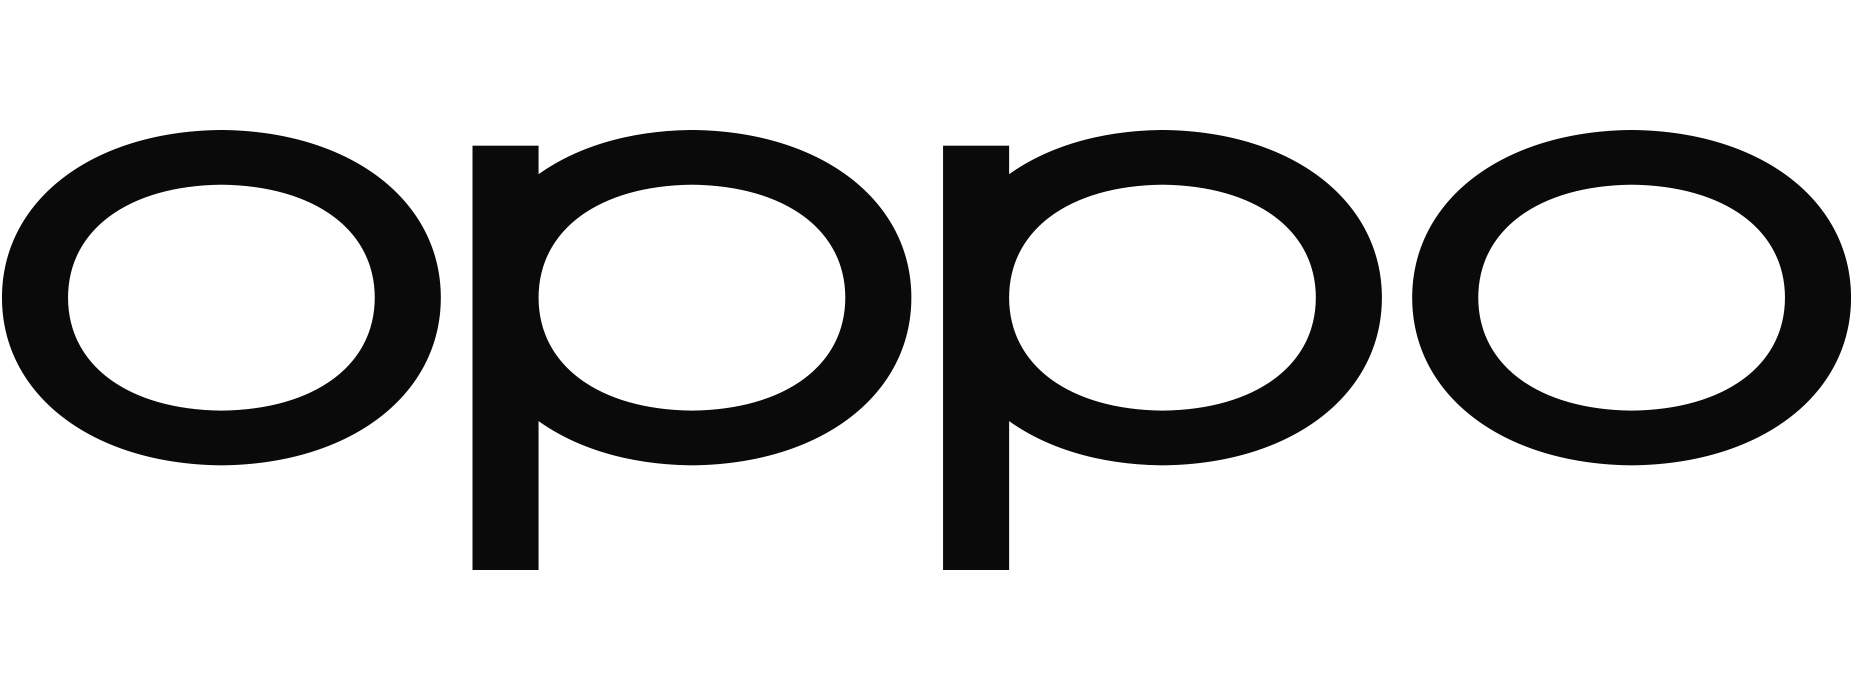 Oppo Logo PNG Transparent Oppo Logo.PNG Images. | PlusPNG